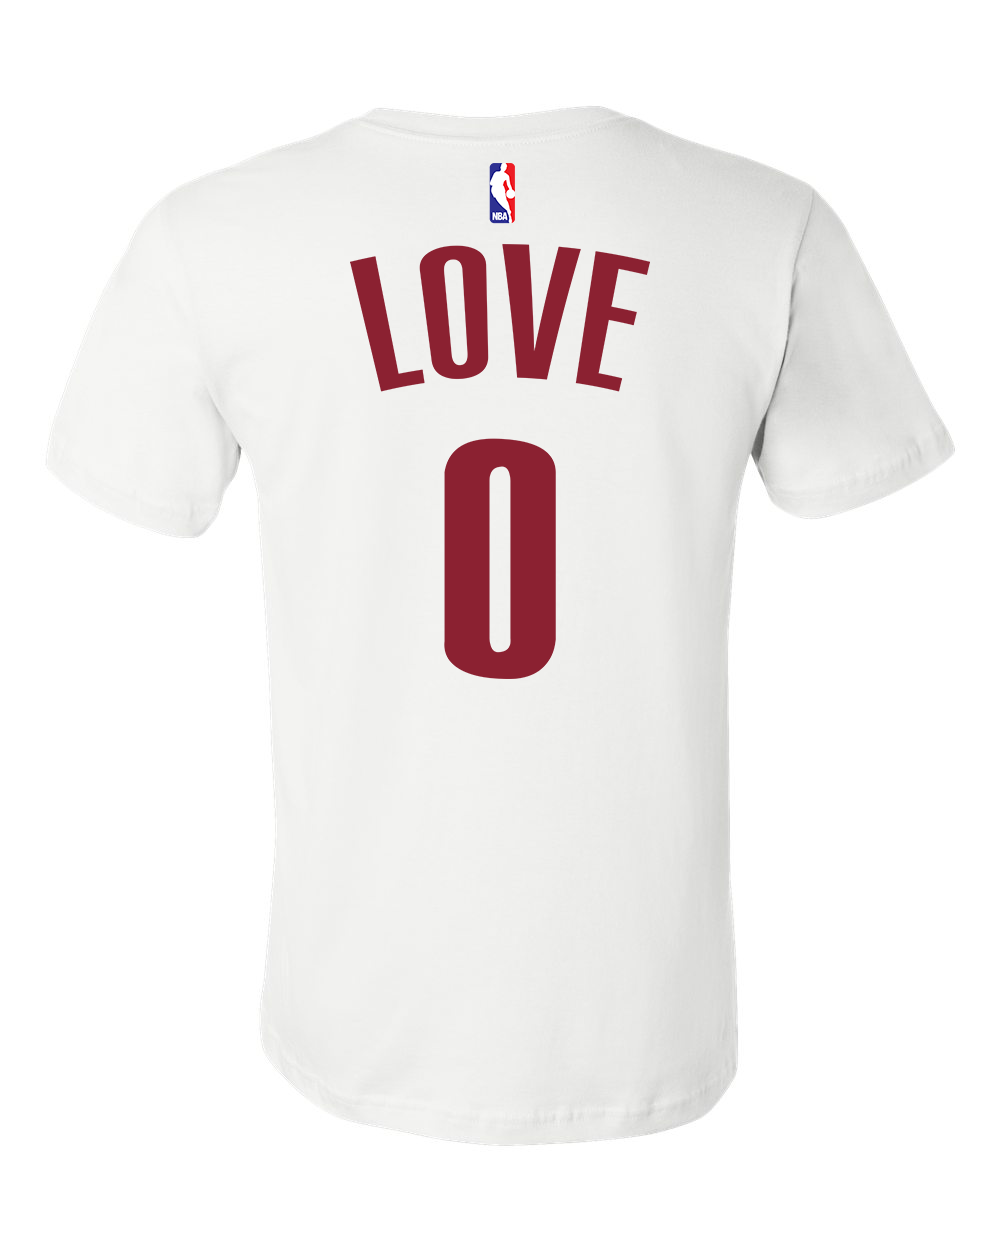 Kevin Love Jersey, Kevin Love Shirts, Apparel